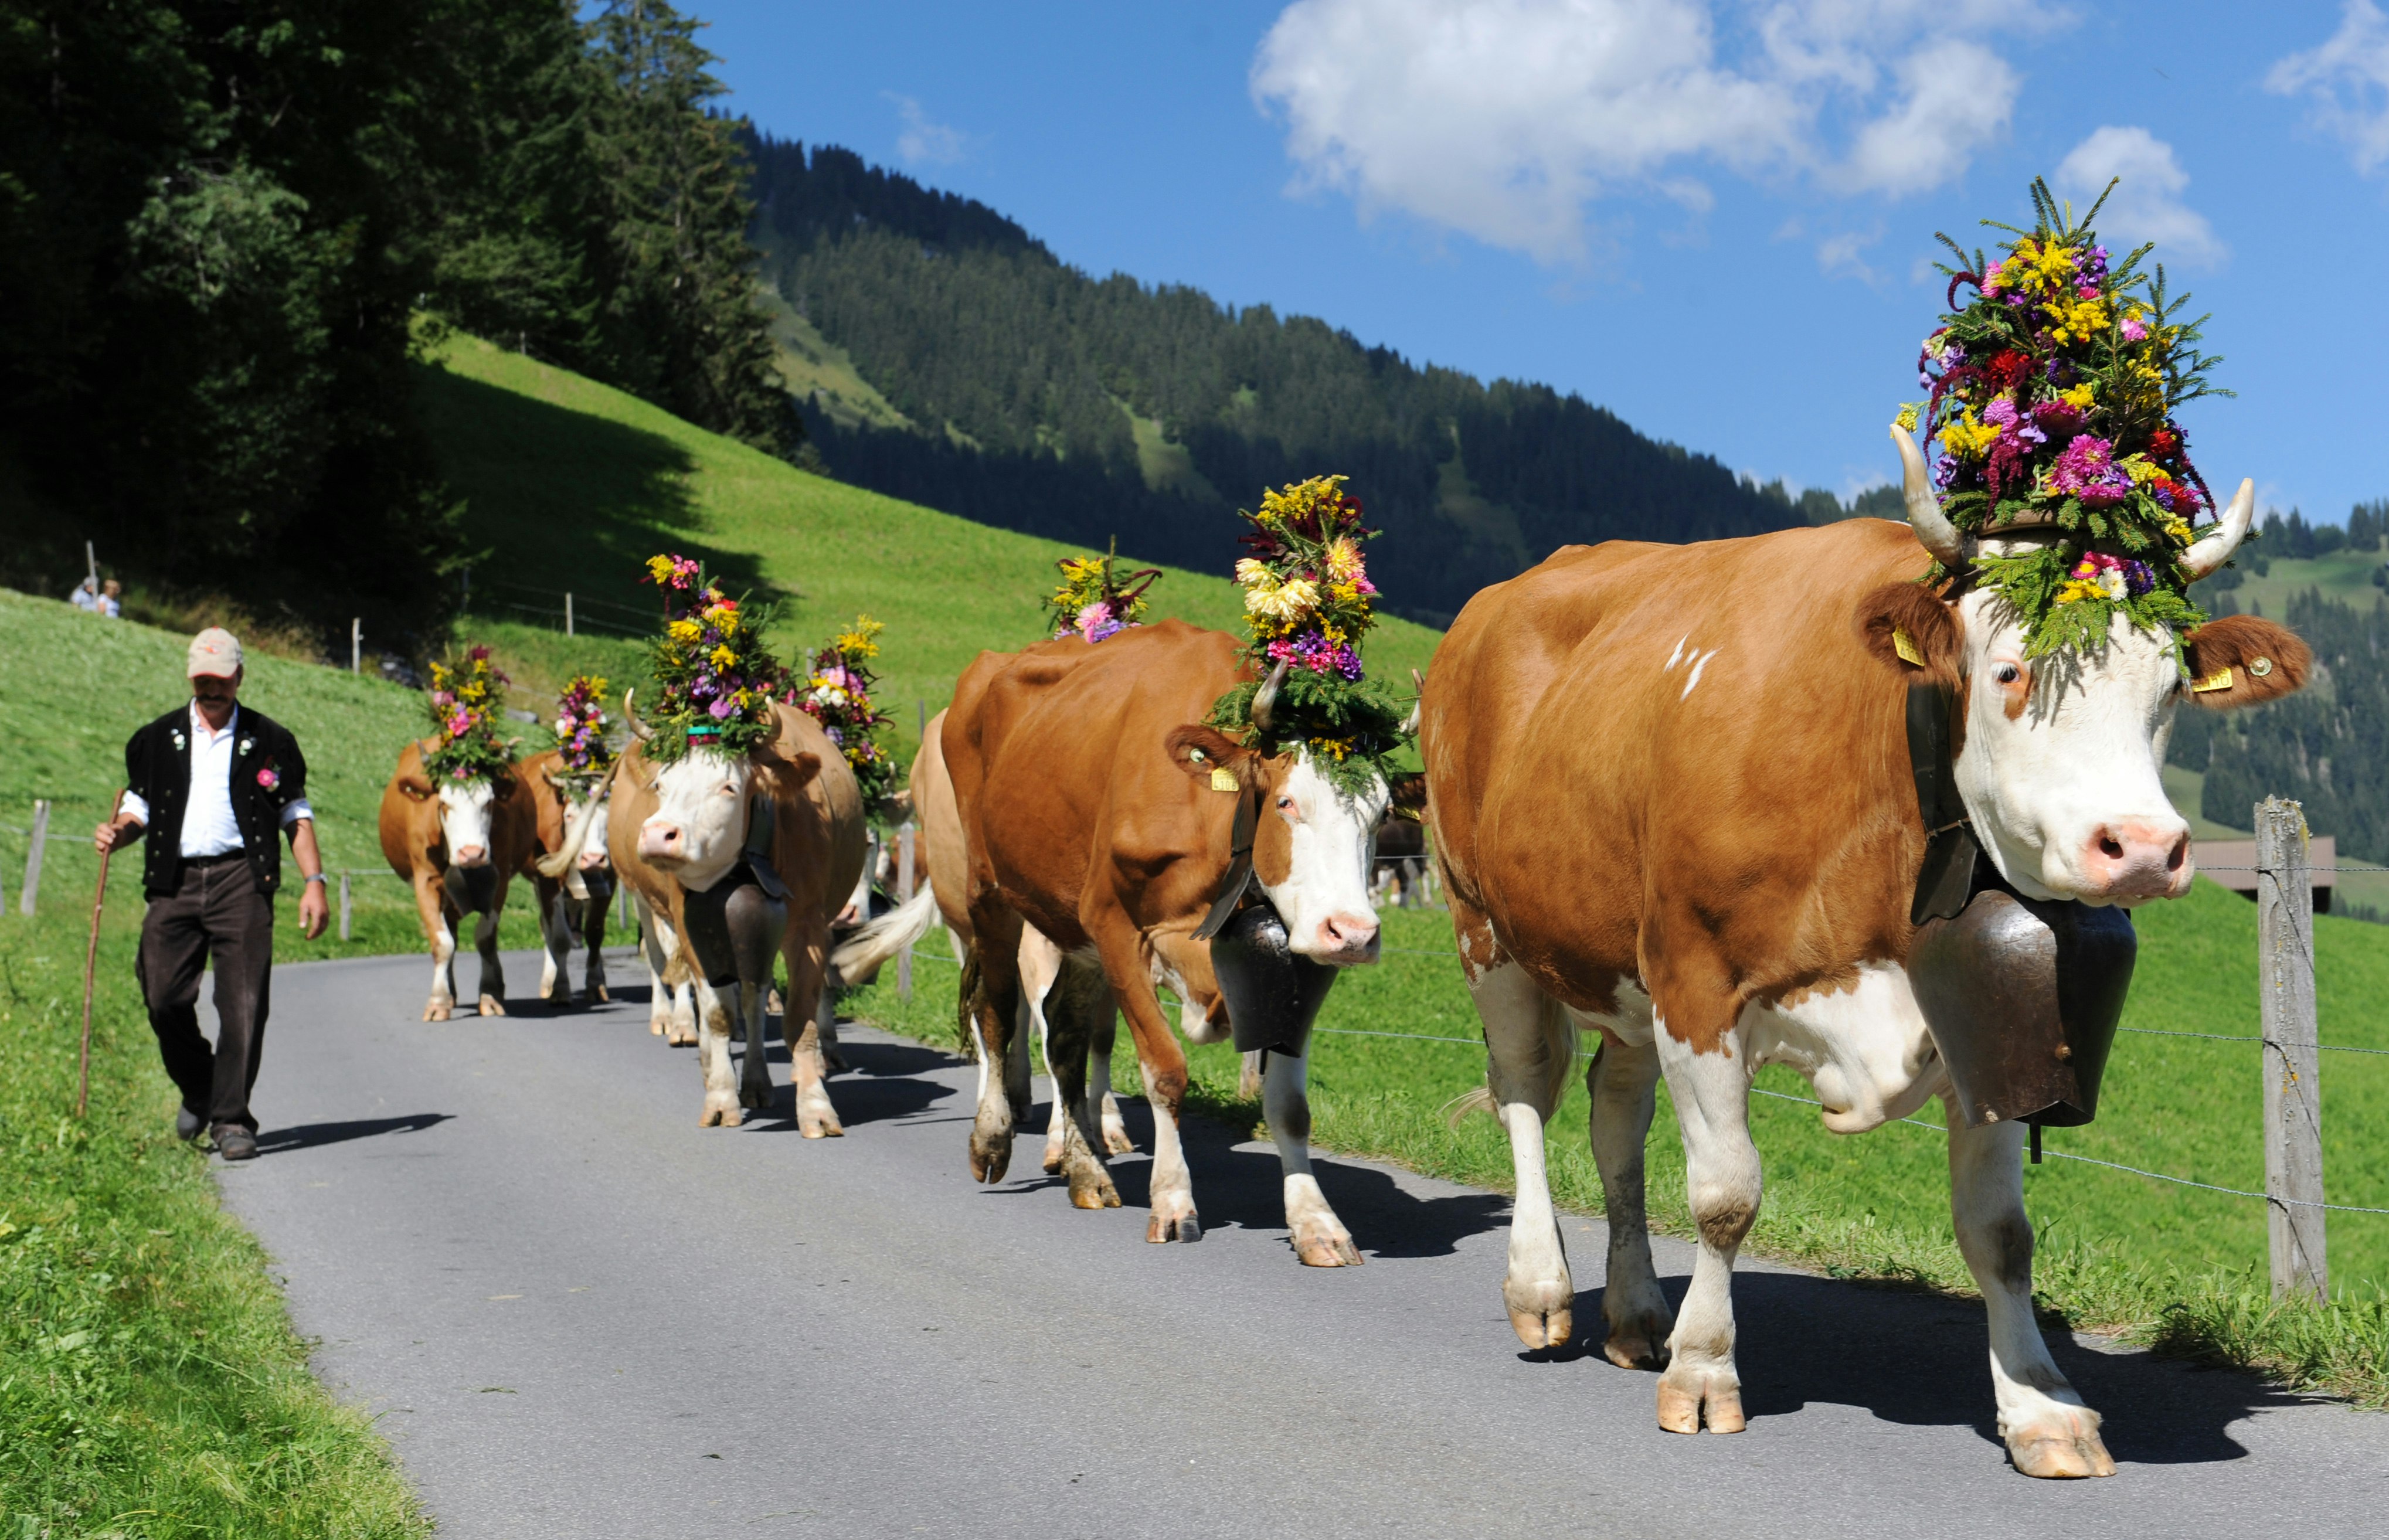 As part of the Swiss Cow Festival, herders bring the cows down the mountain festooned with special bells, flowers, and other ceremonial finery.